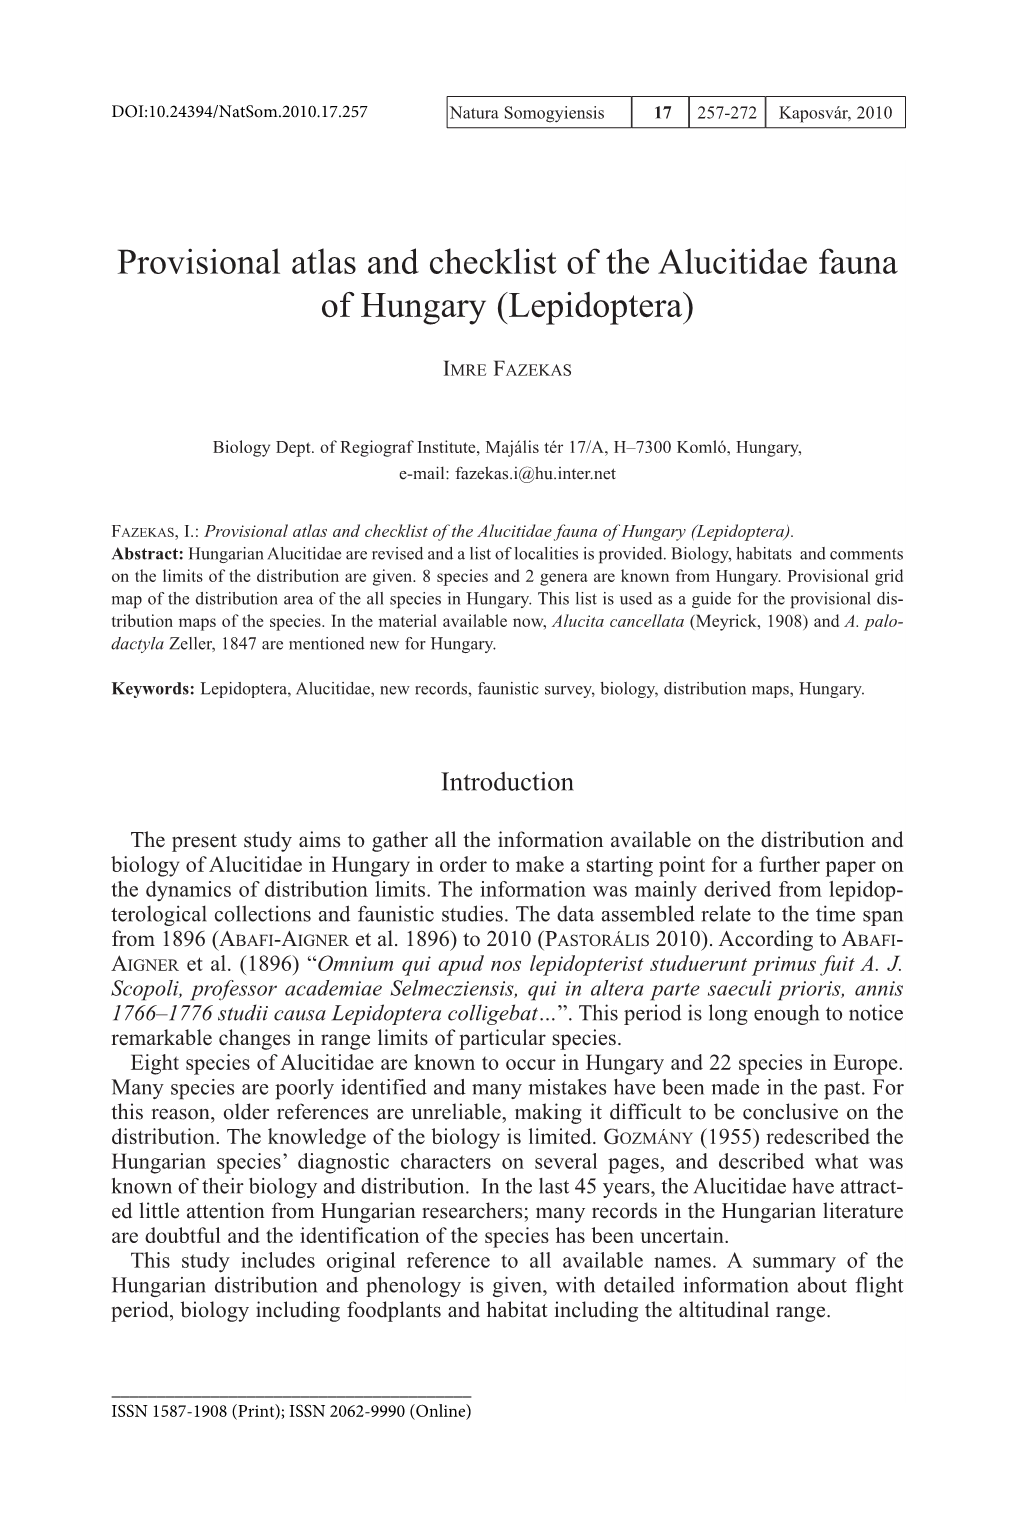 Provisional Atlas and Checklist of the Alucitidae Fauna of Hungary (Lepidoptera)